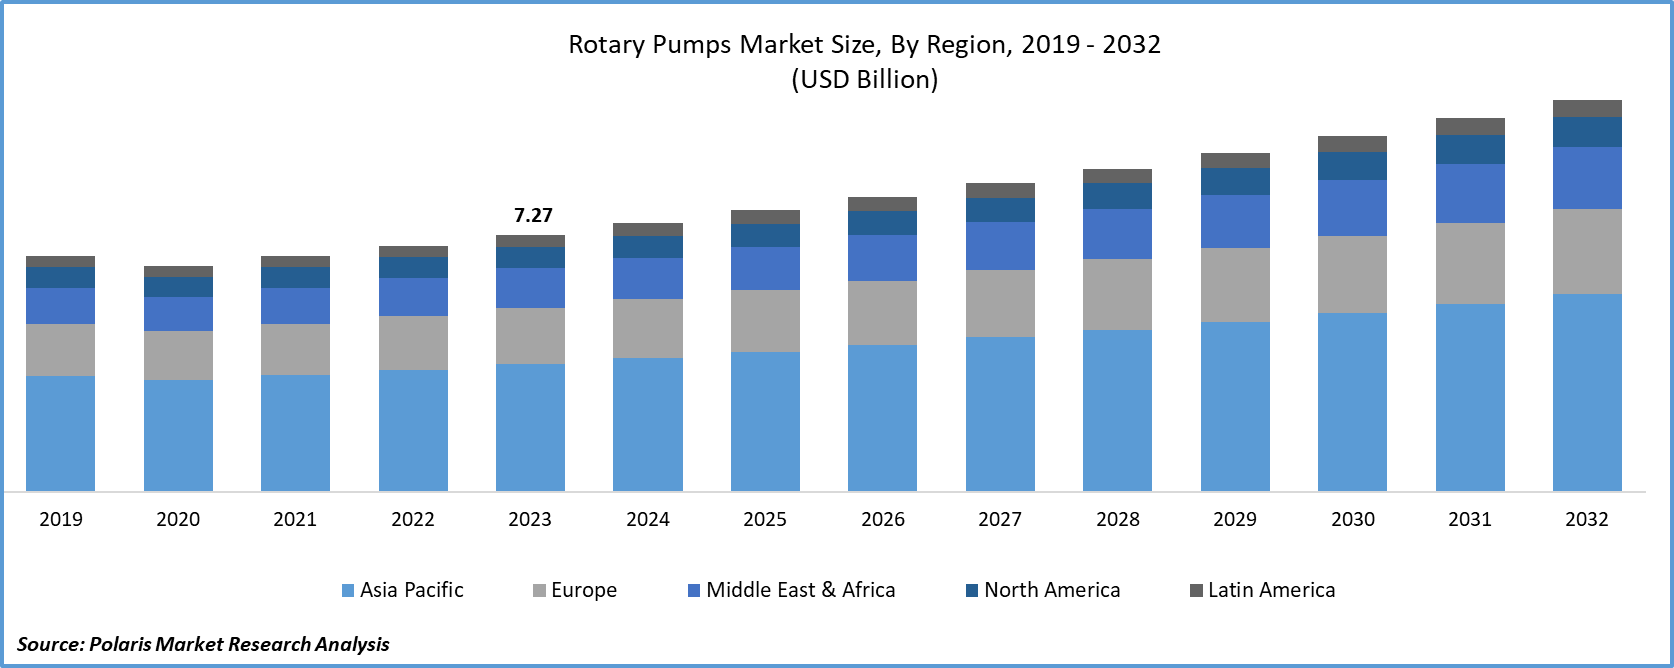 Rotary Pumps Market Size